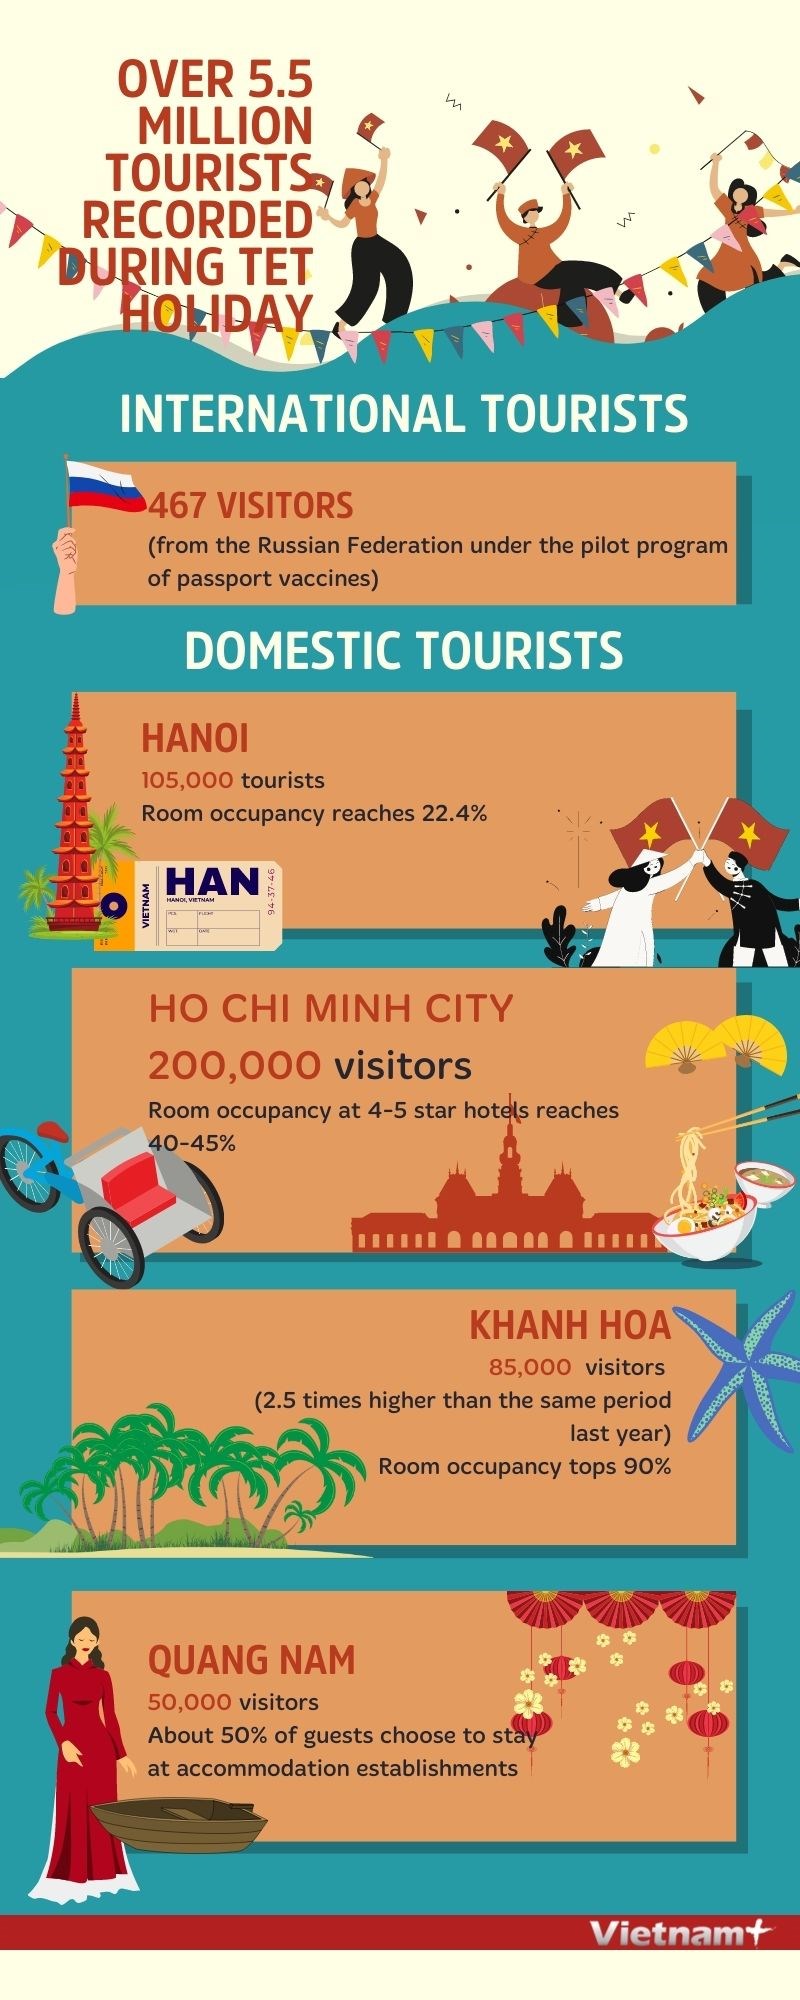 Over 5.5 million tourists recorded during Tet holiday hinh anh 1